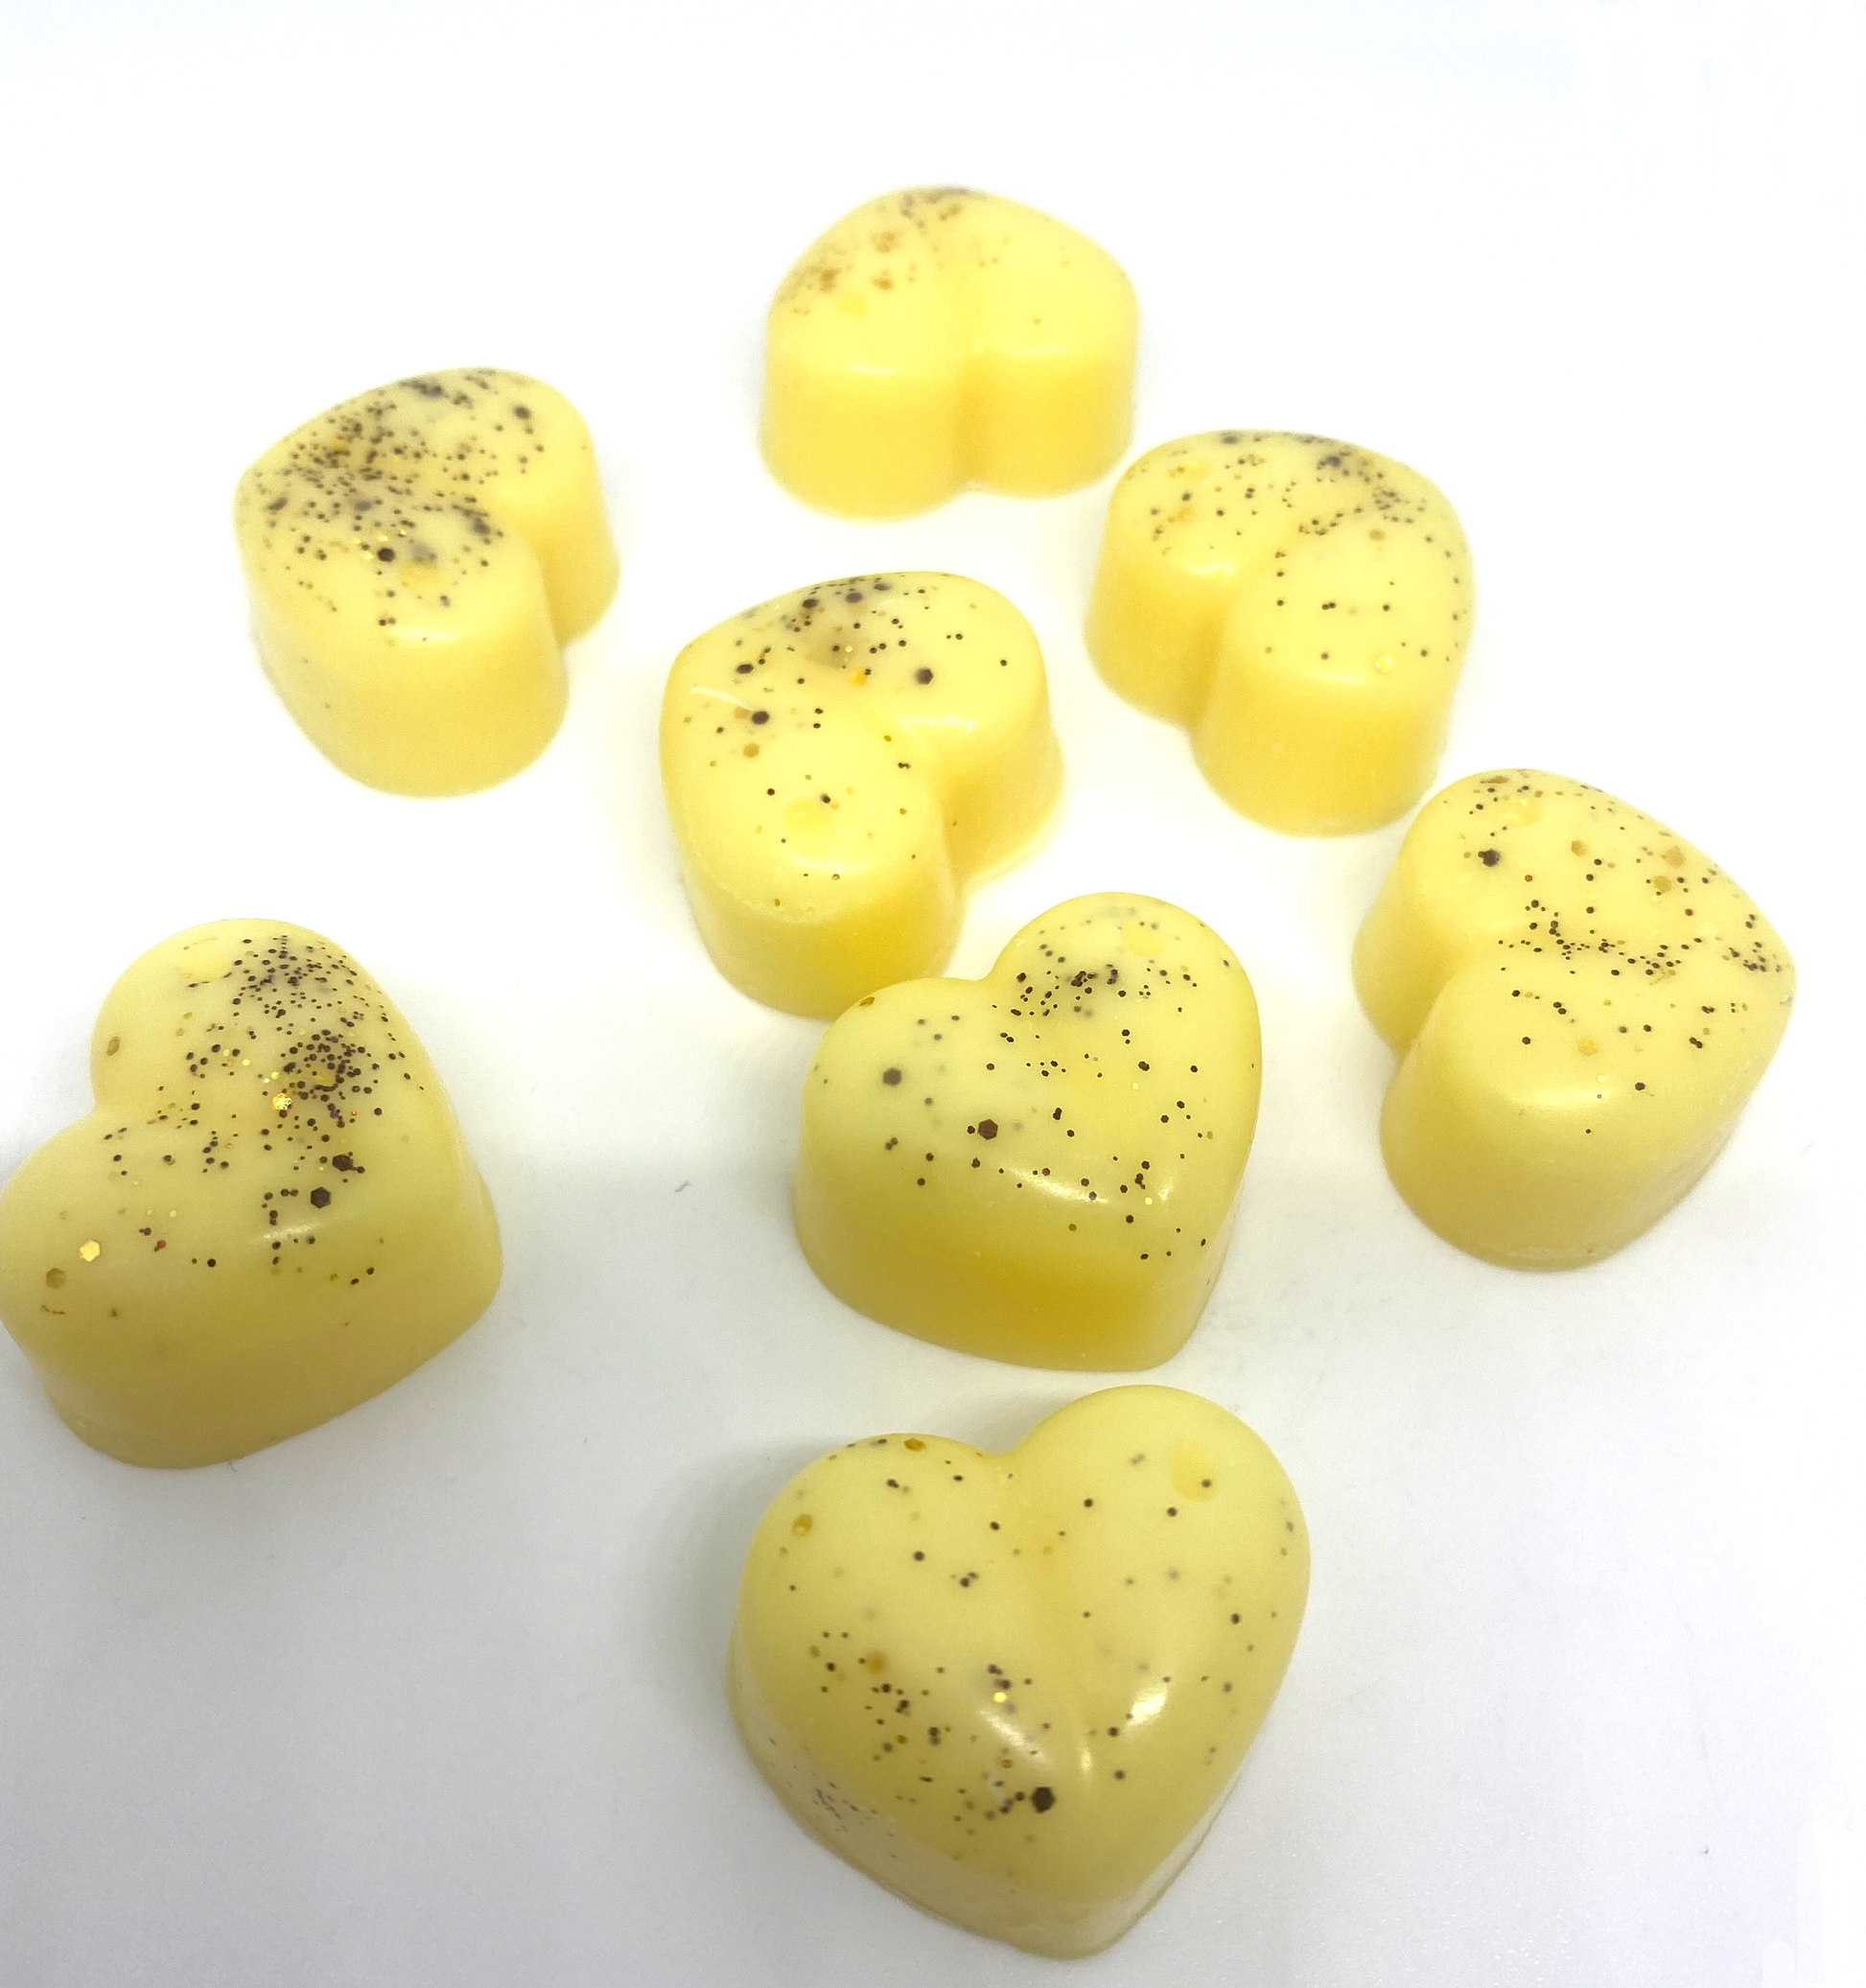 Vanilla Anise Wax Melts Inspired by JM - ScentiMelti  Vanilla Anise Wax Melts Inspired by JM